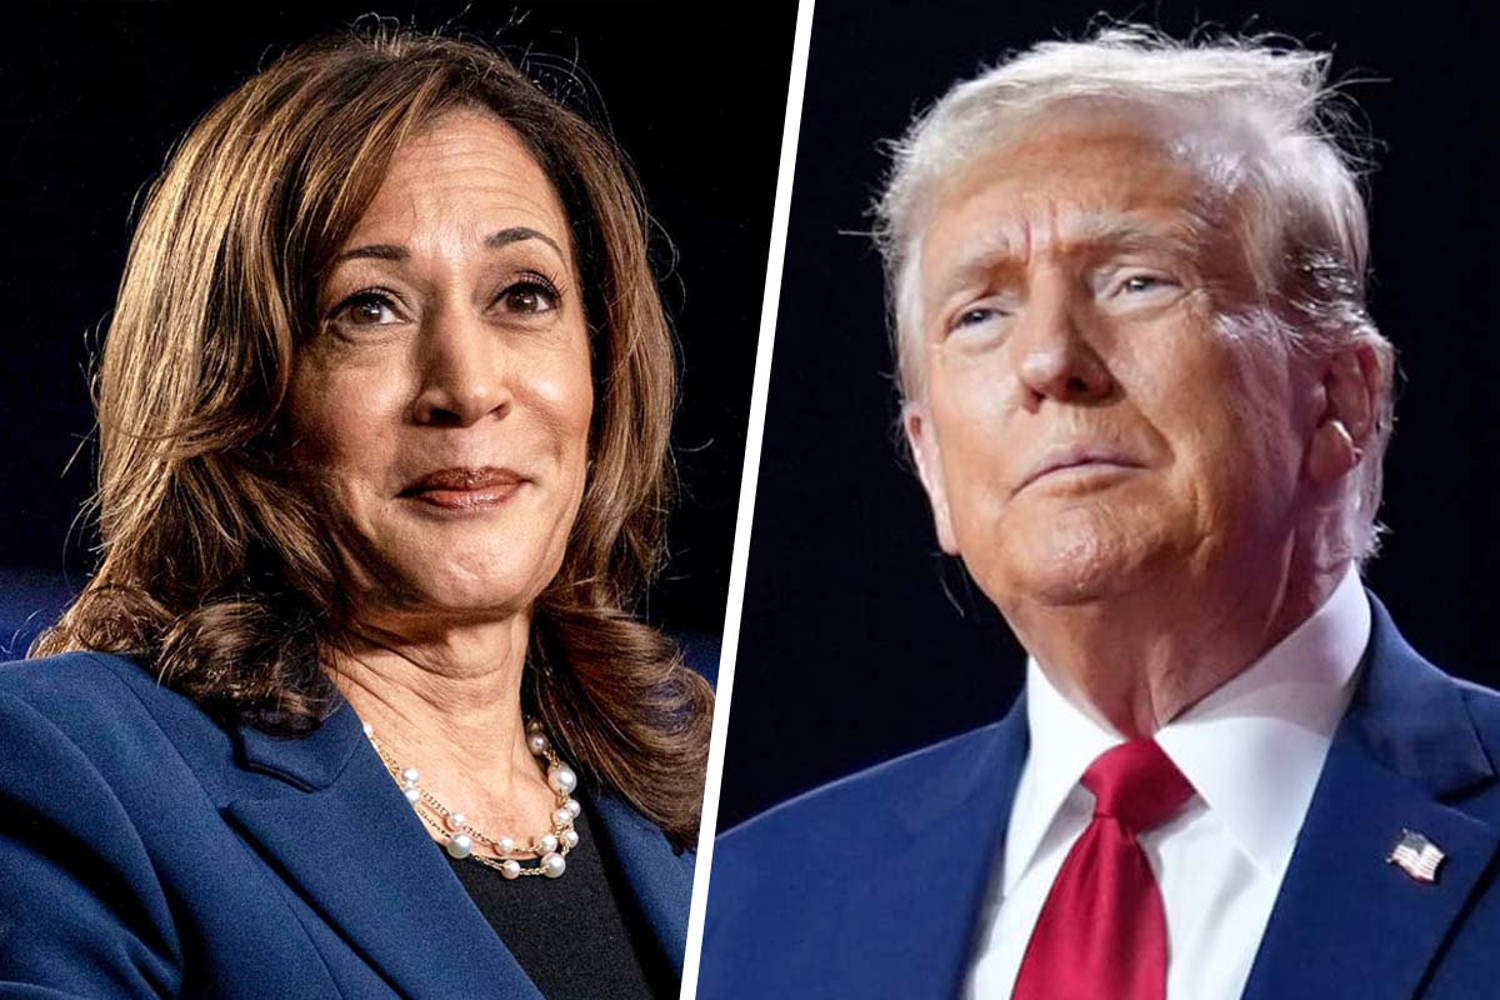 Trump struggles to keep his edge against Harris with fewer than 100 days until the election